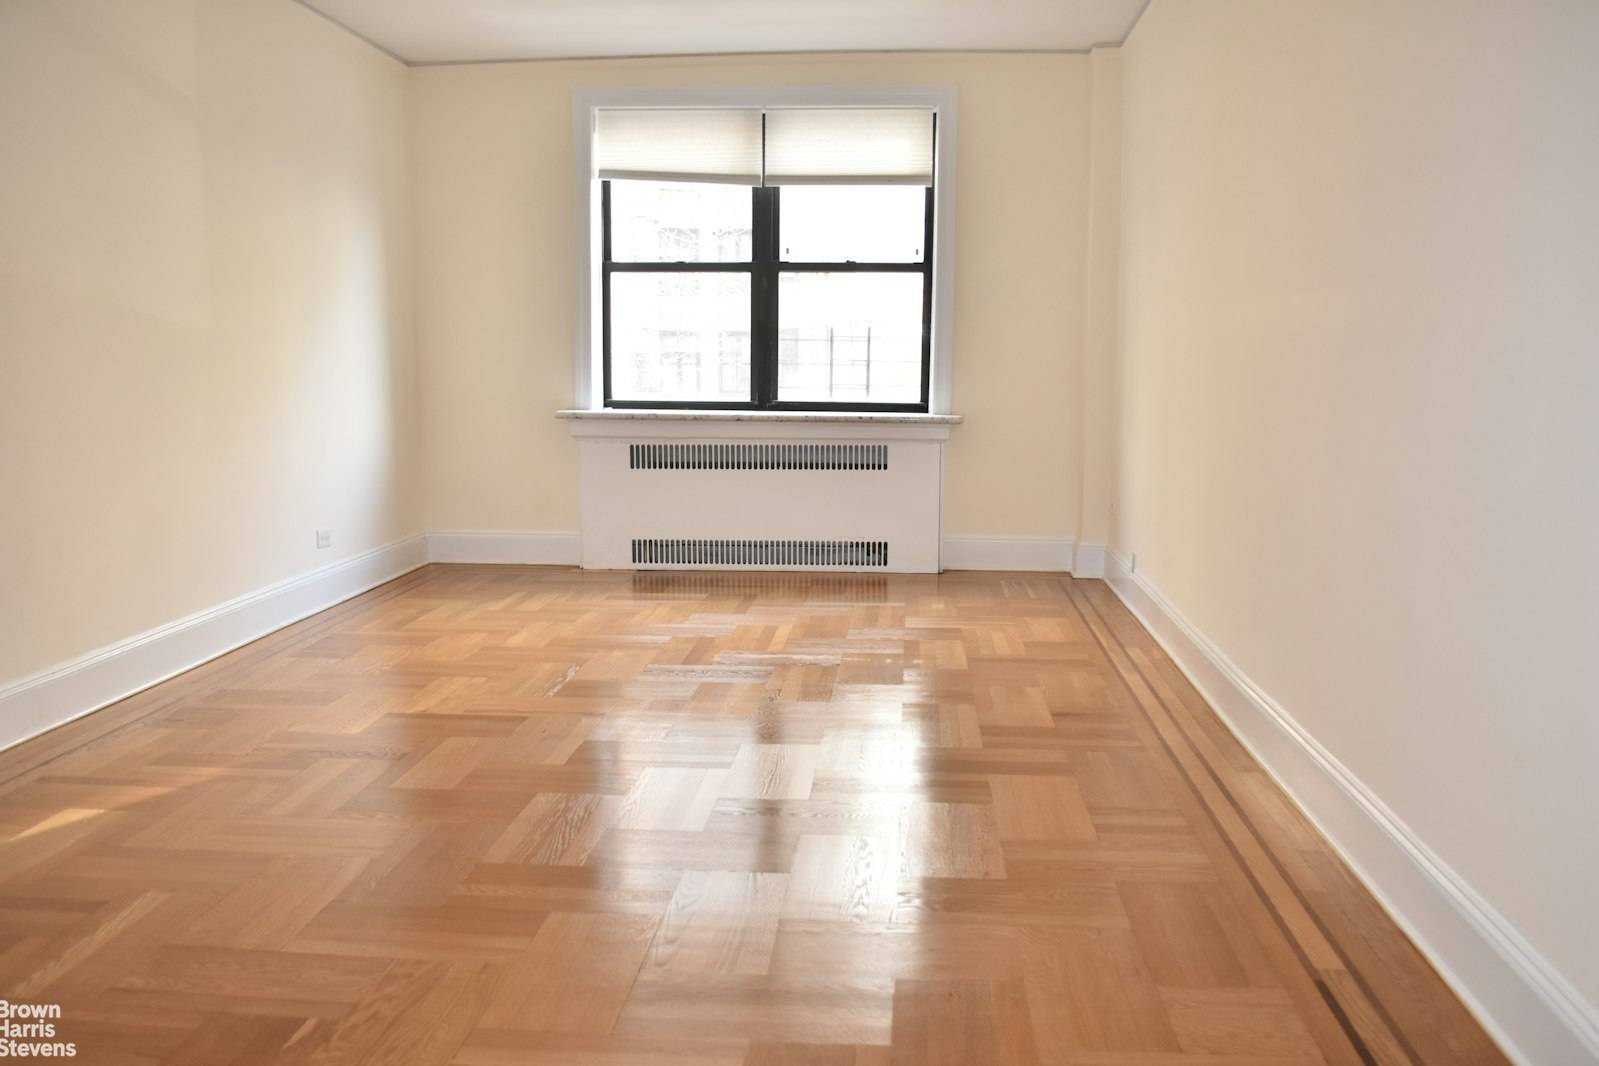 If your looking for a great Art Deco 2 bedroom, look no further.